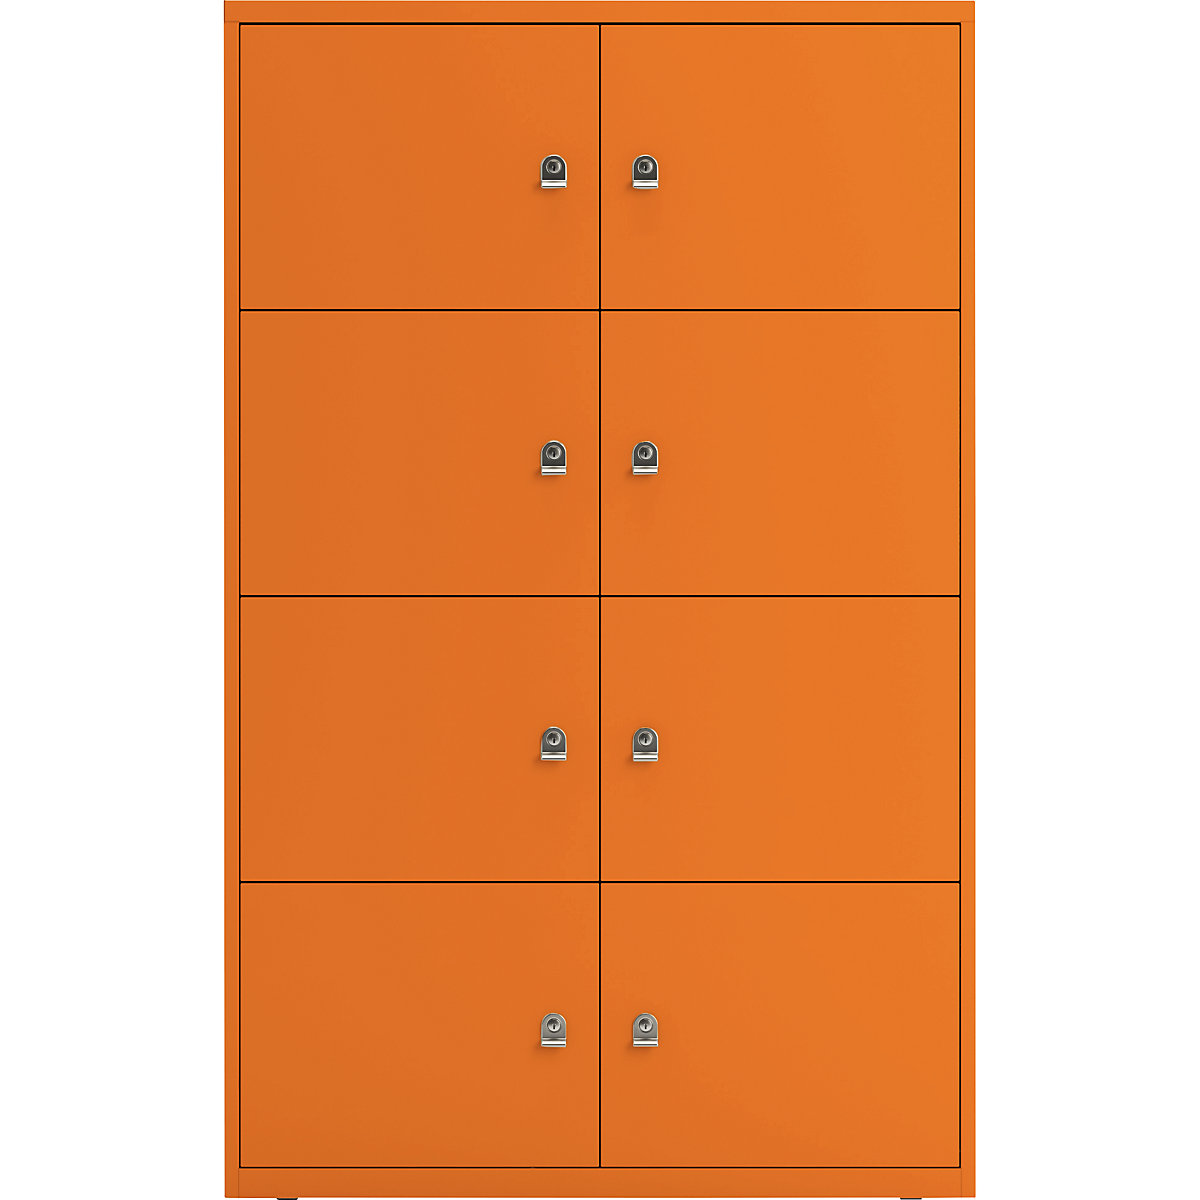 BISLEY – LateralFile™ lodge, with 8 lockable compartments, height 375 mm each, orange